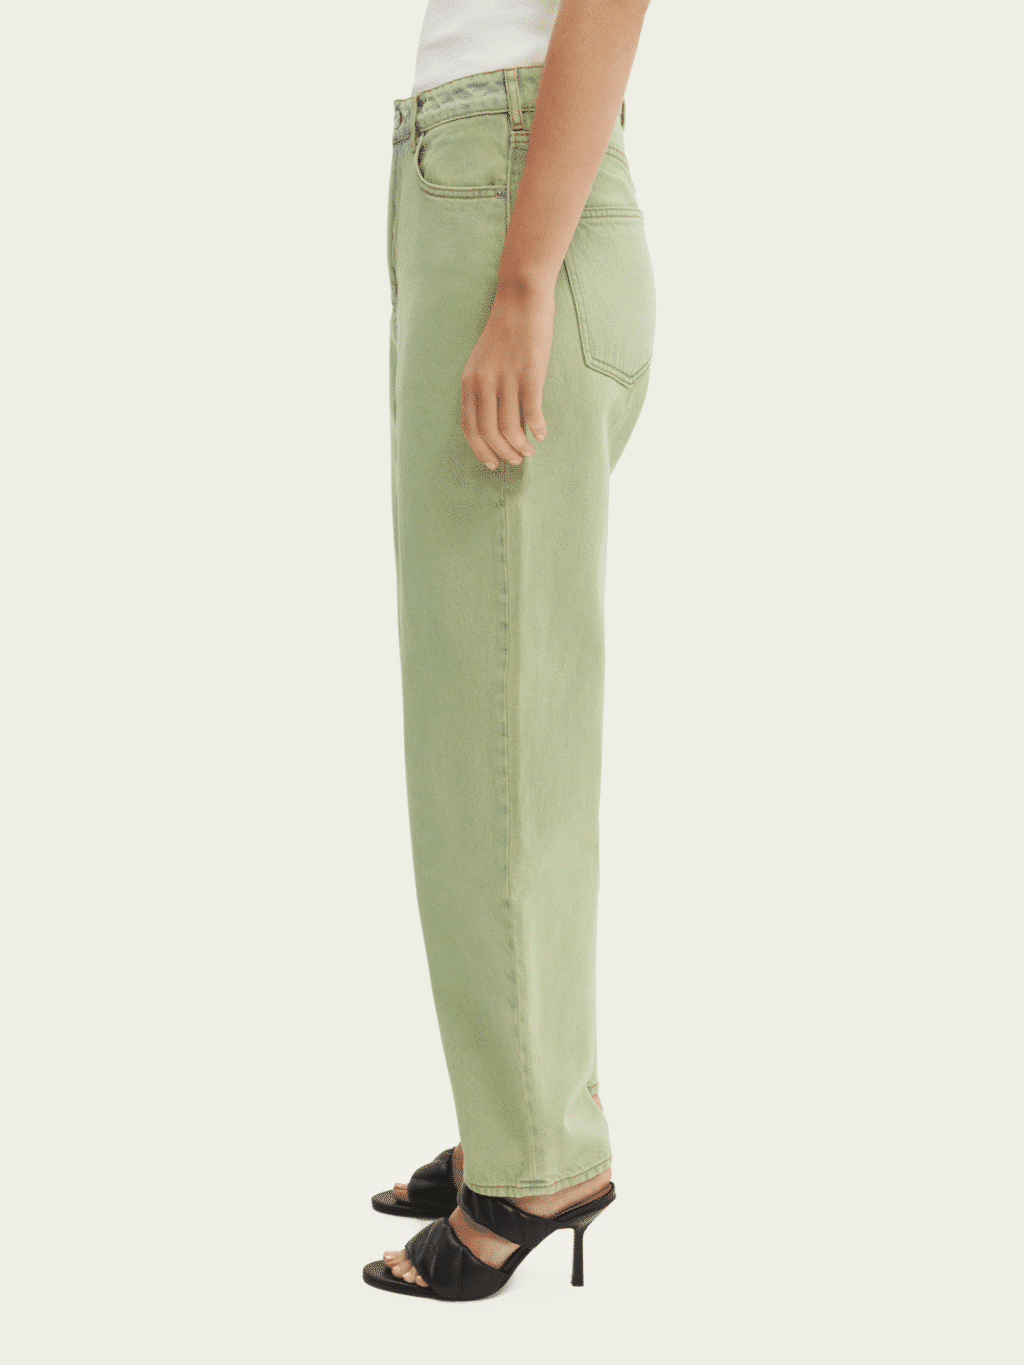 Spring summer 2022 SCOTCH & SODA THE TIDE BALLOON LEG FIT JEANS